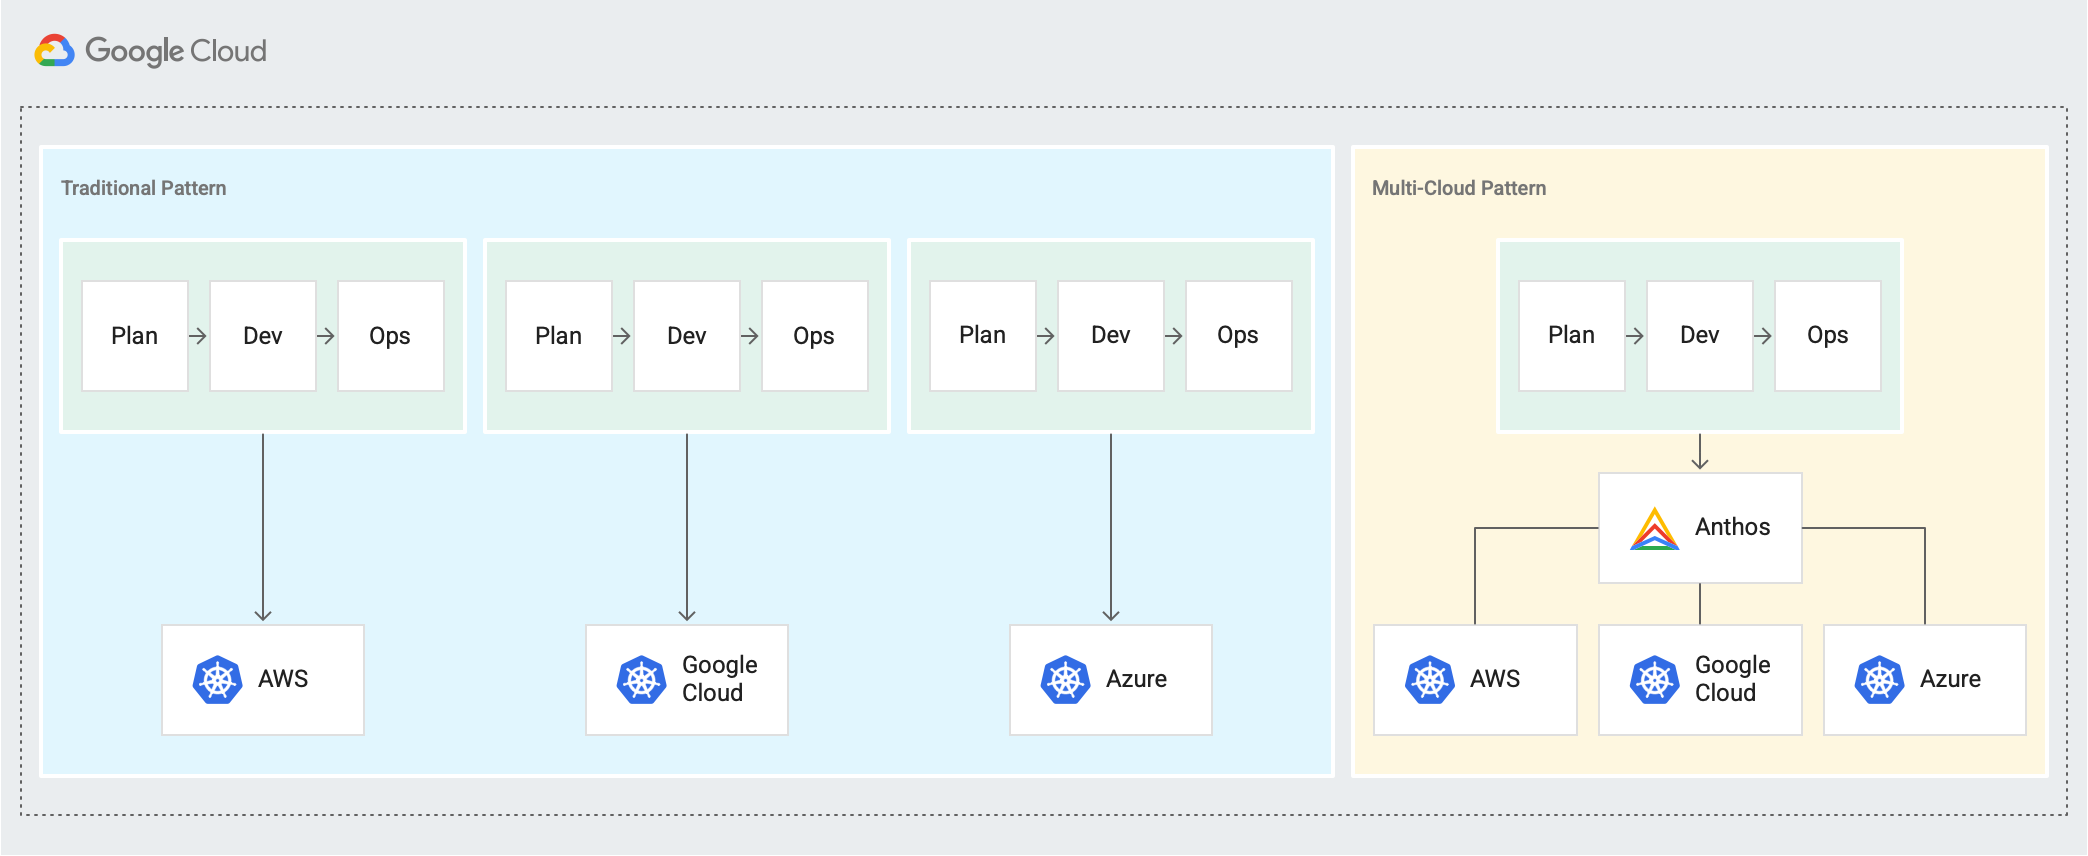 Shows a 'Traditional pattern' of separate Plan -> Develop -> Operate cycles for AWS, Google Cloud, and Azure and a new 'Multi-Cloud pattern' where Plan -> Develop -> Operate cycles are connected through Anthos.